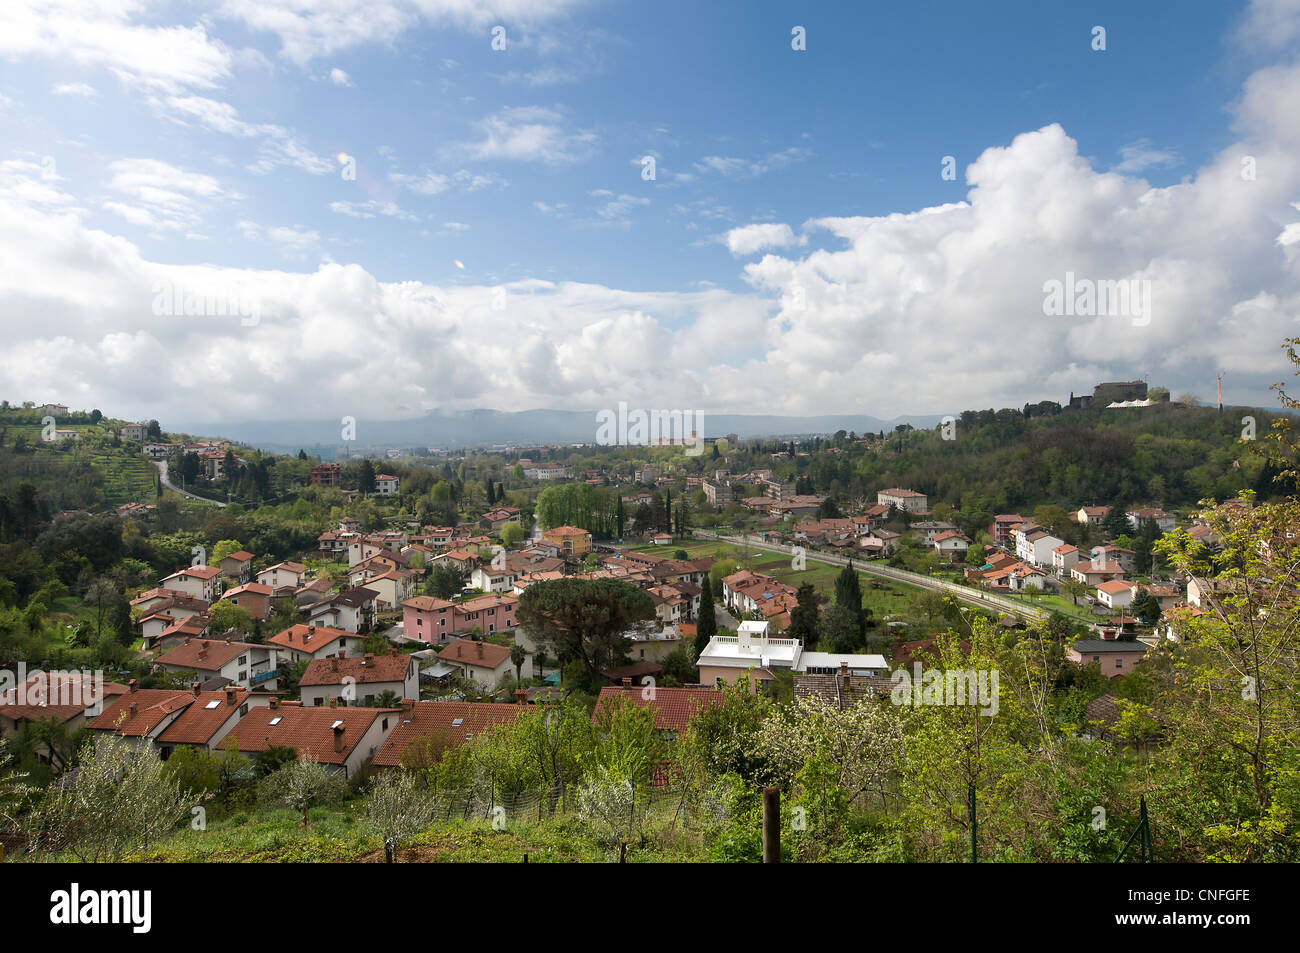 a view of Gorizia from the hill in slovenian territory Stock Photo